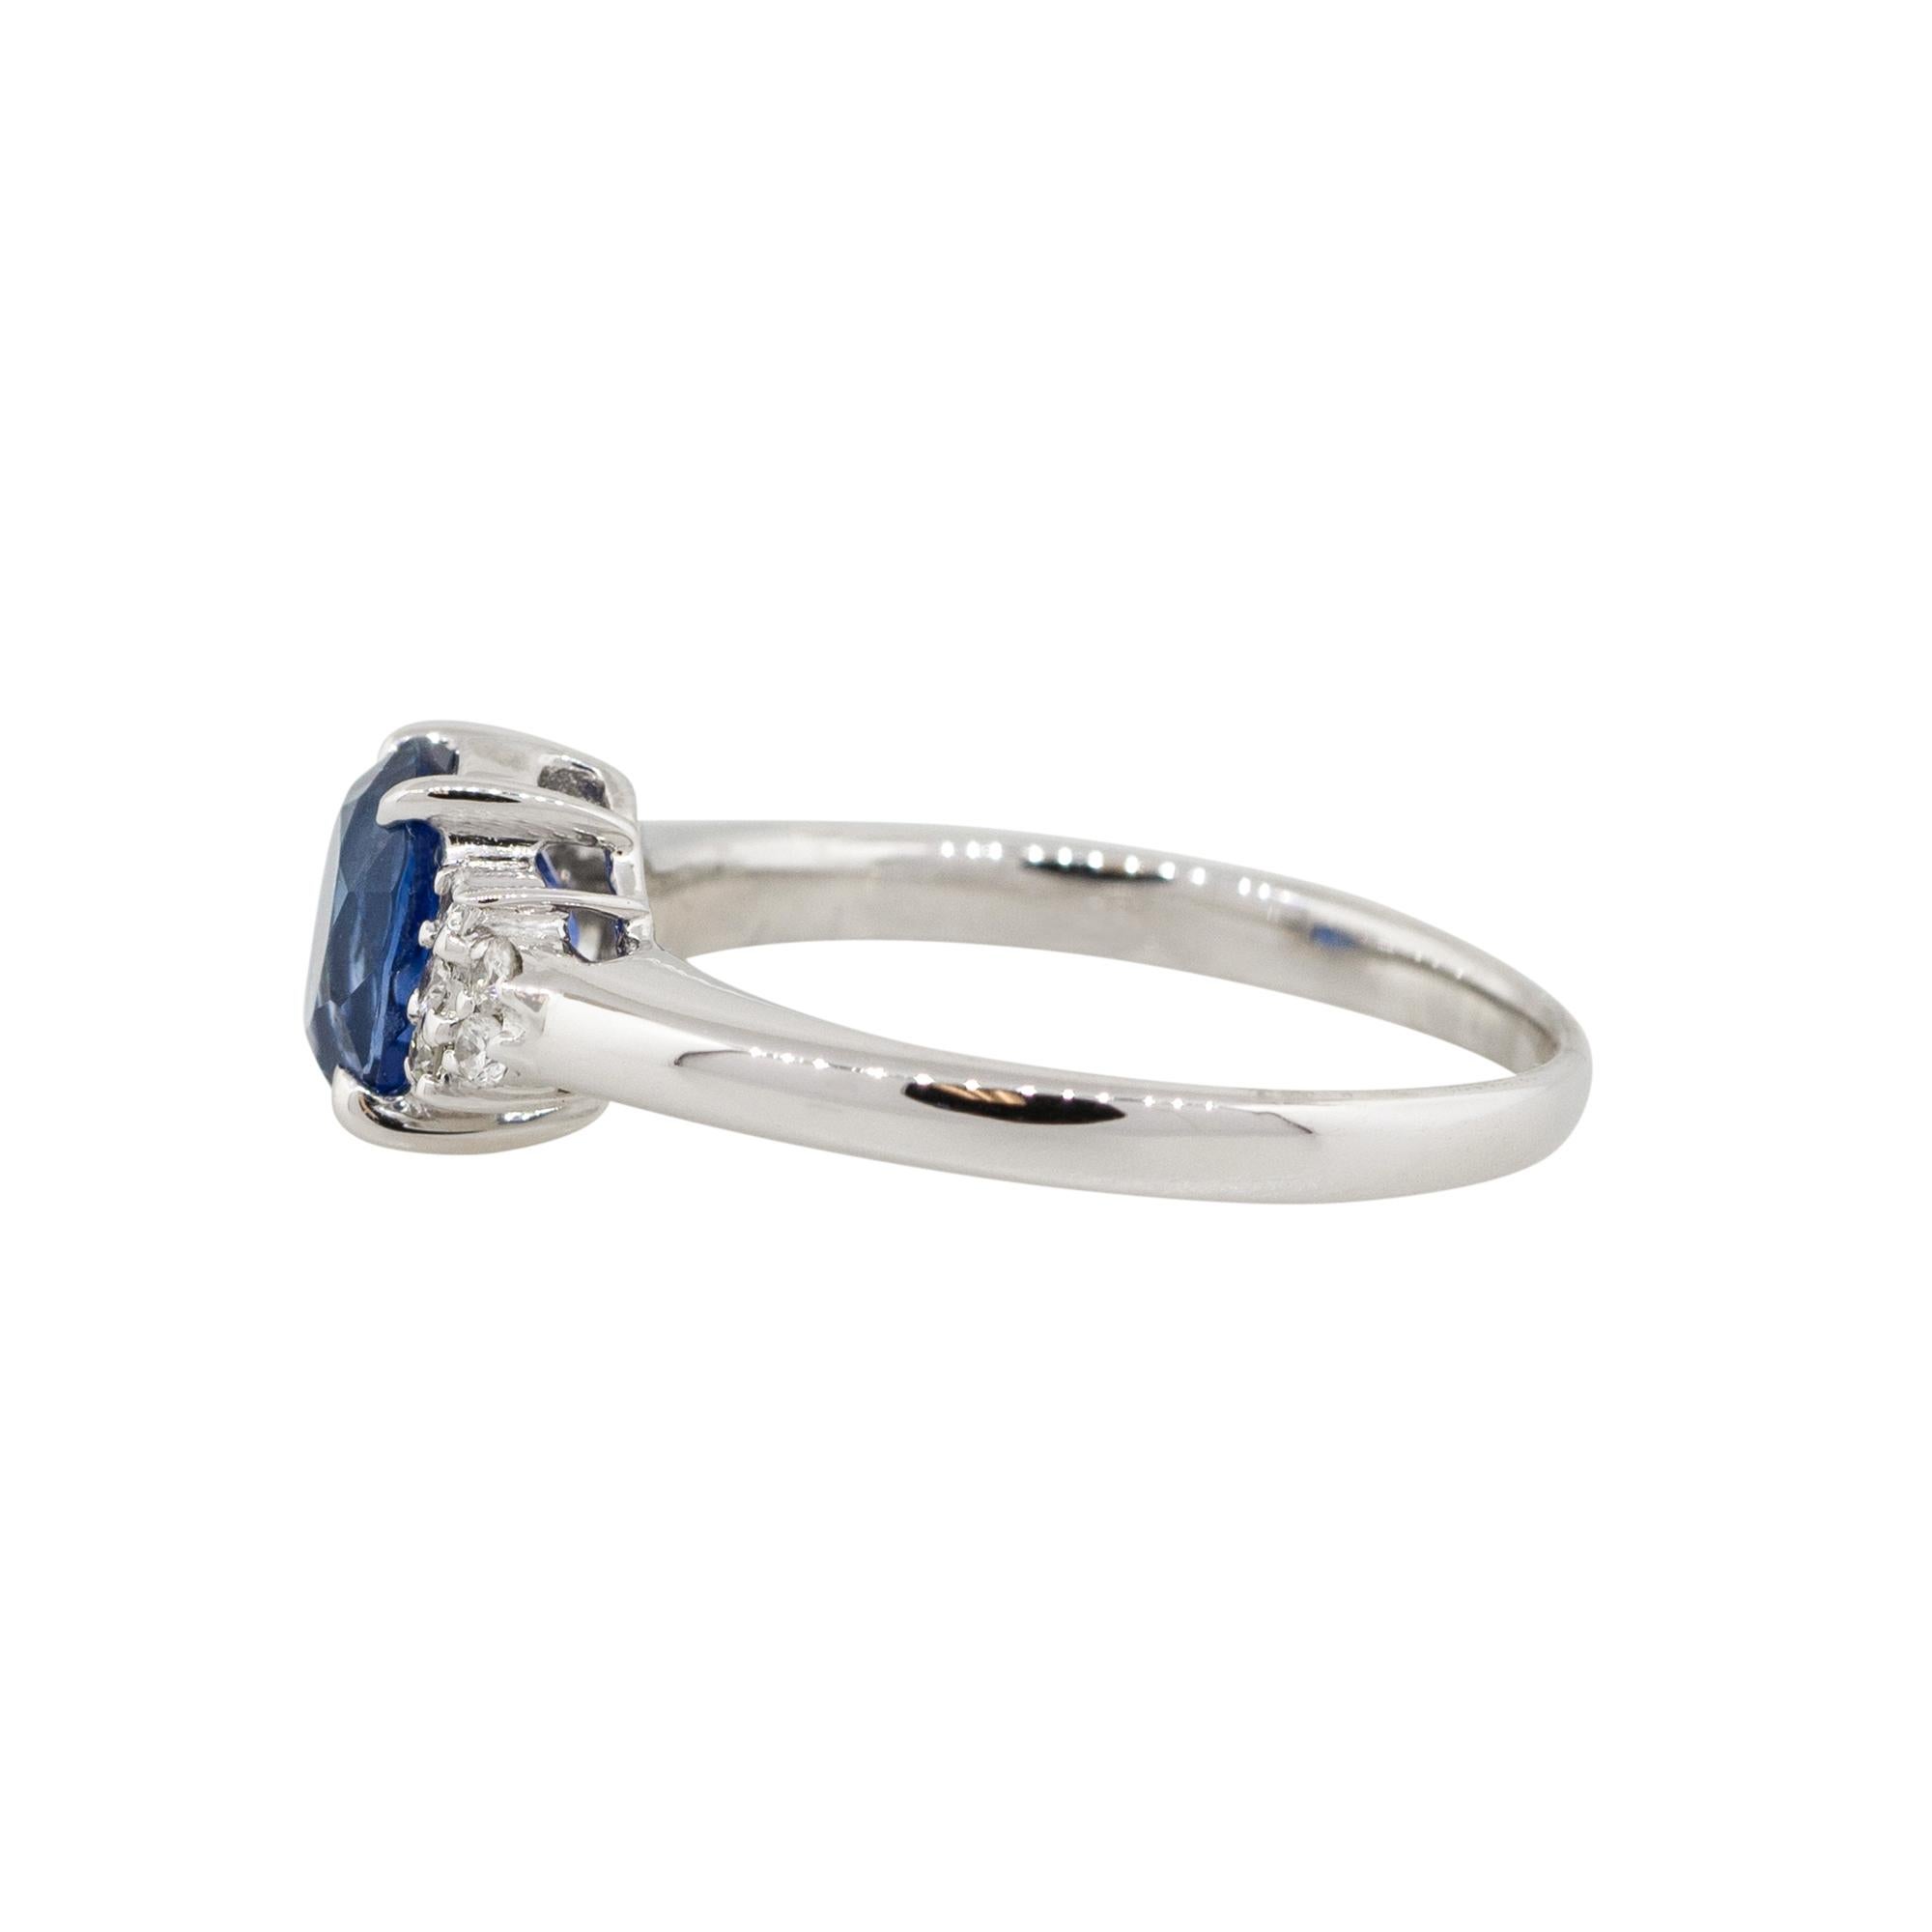 1.58 Carat Oval Shape Sapphire Diamond Cluster Cocktail Ring Platinum in Stock In New Condition For Sale In Boca Raton, FL